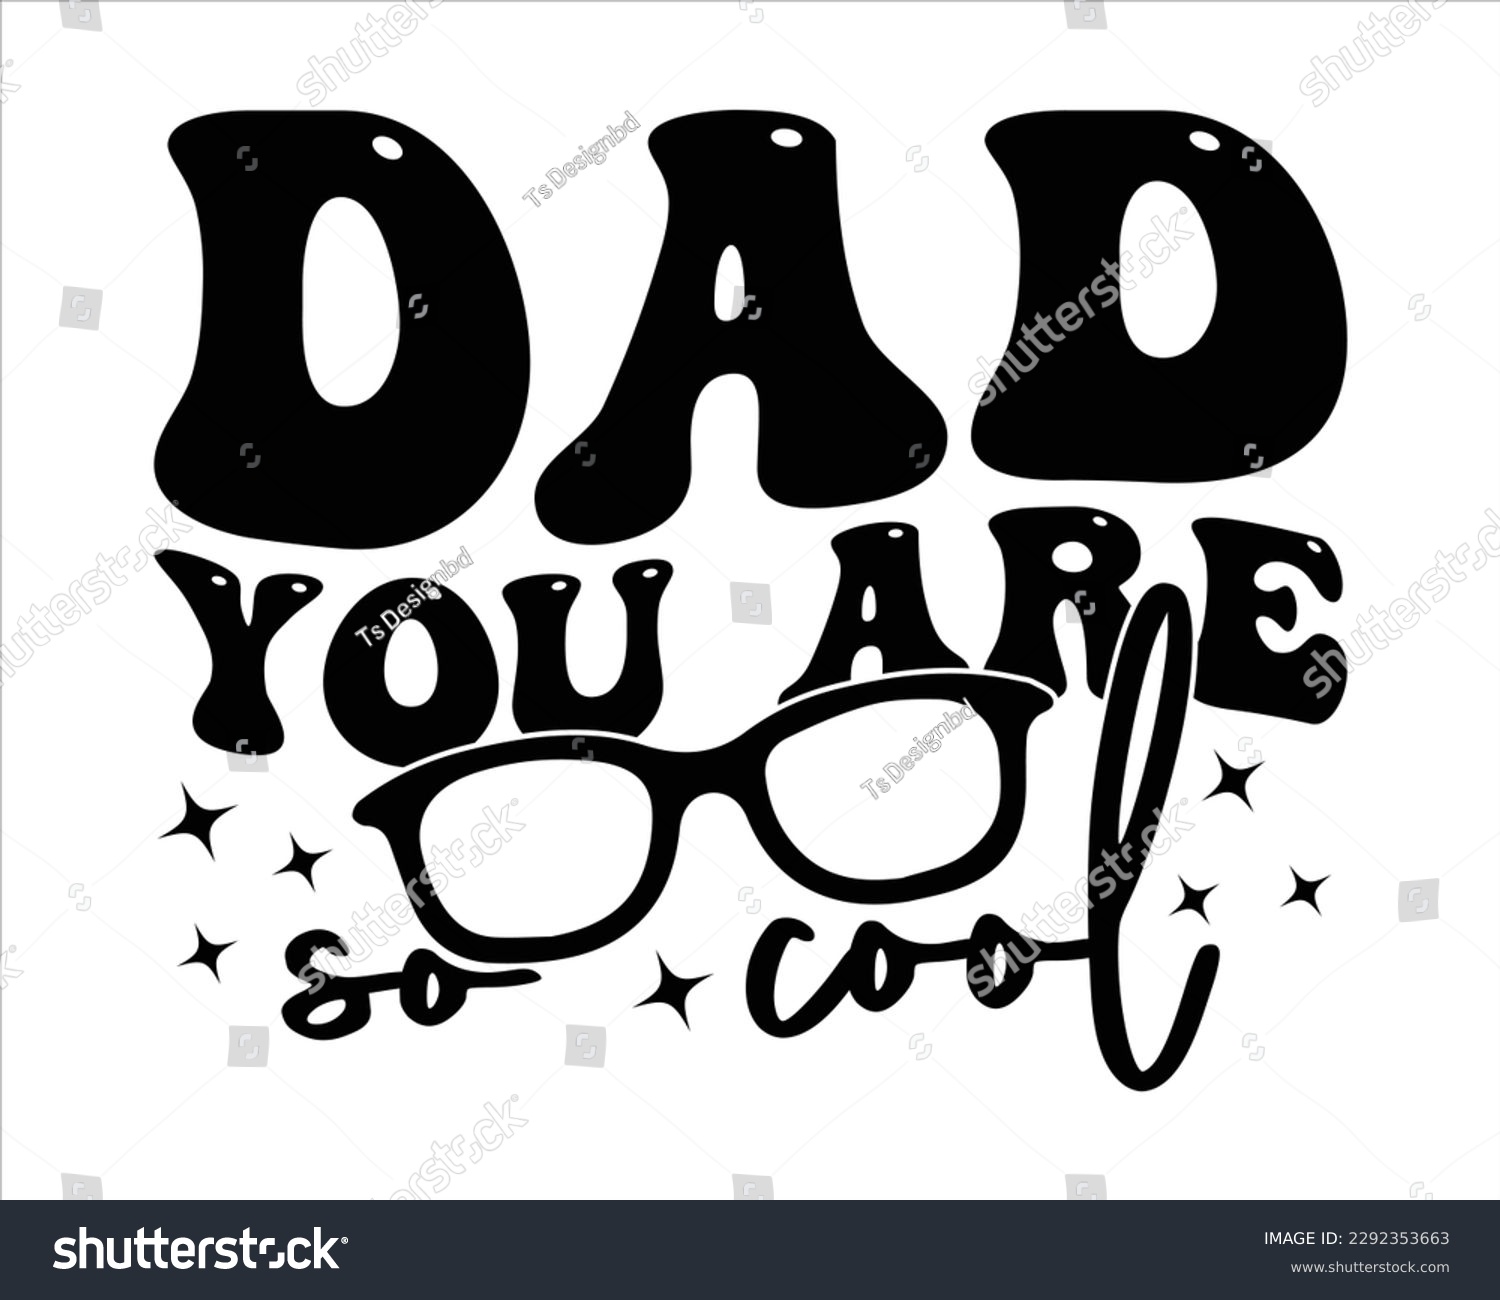 SVG of Dad You Are So Cool Retro svg design,Dad Quotes SVG Designs, Dad quotes t shirt designs ,Quotes about Dad, Father cut files, Papa eps files,Father Cut File svg